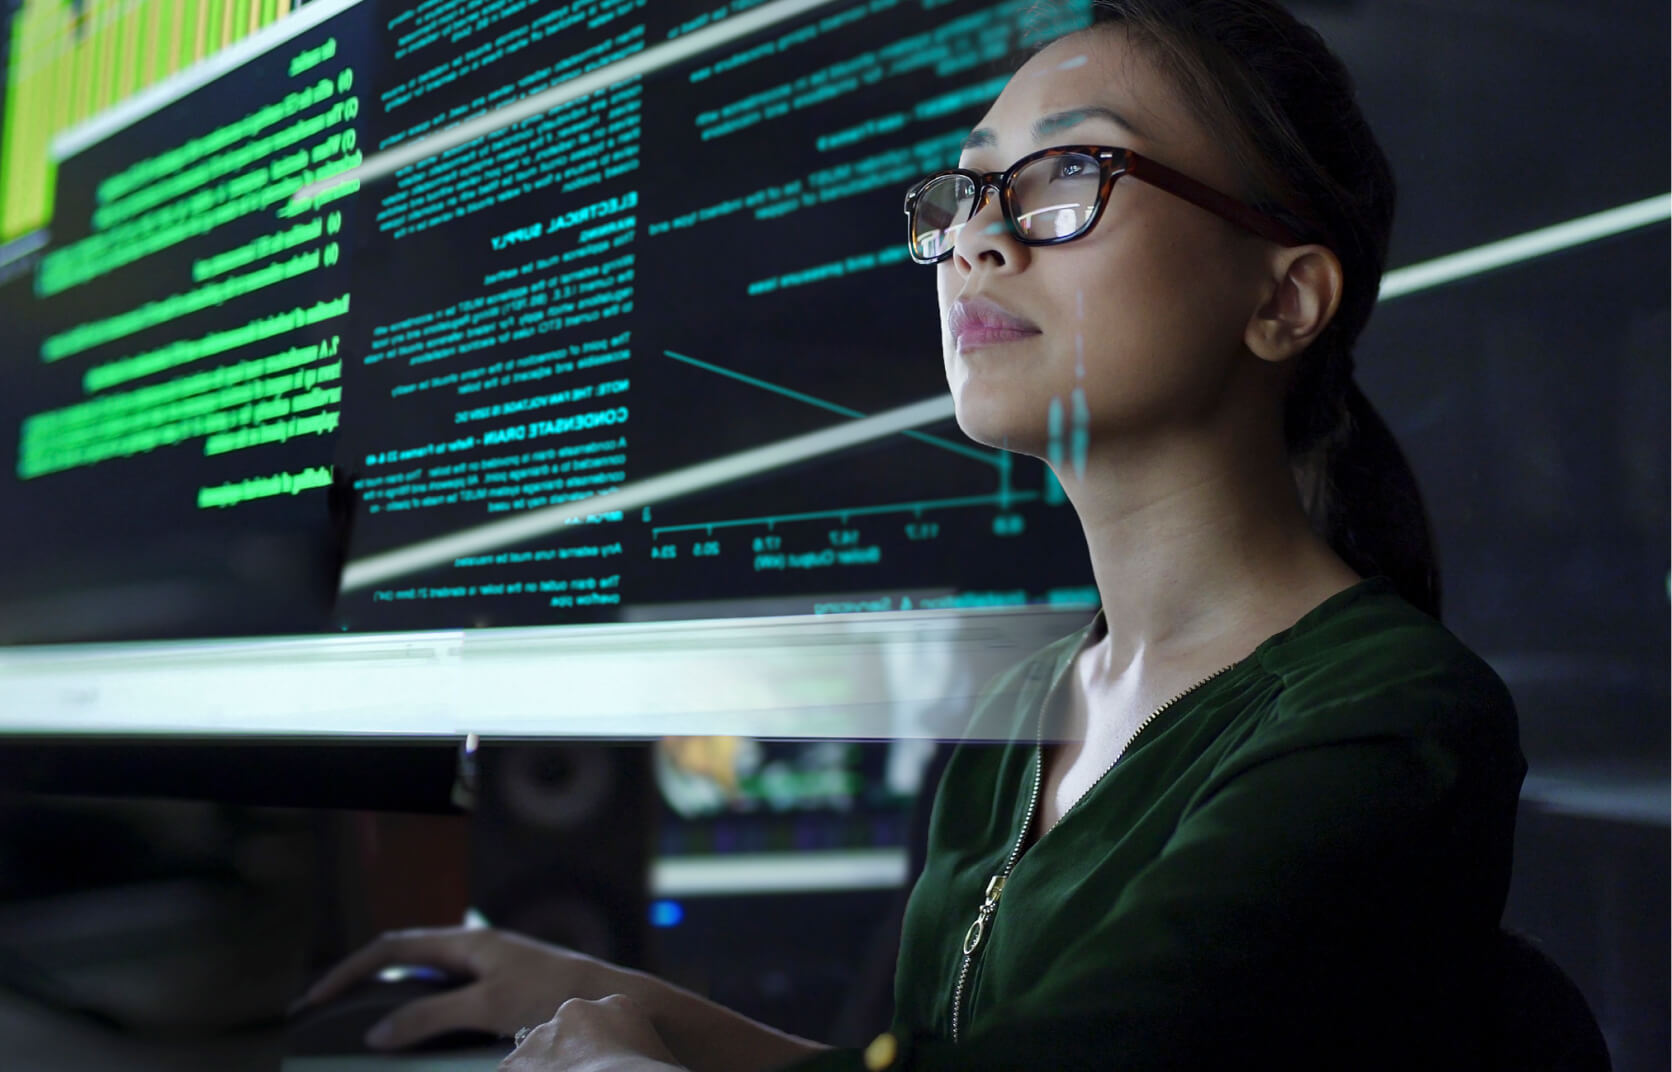 A young woman with glasses reviews code and cybersecurity risk data on a virtual screen display